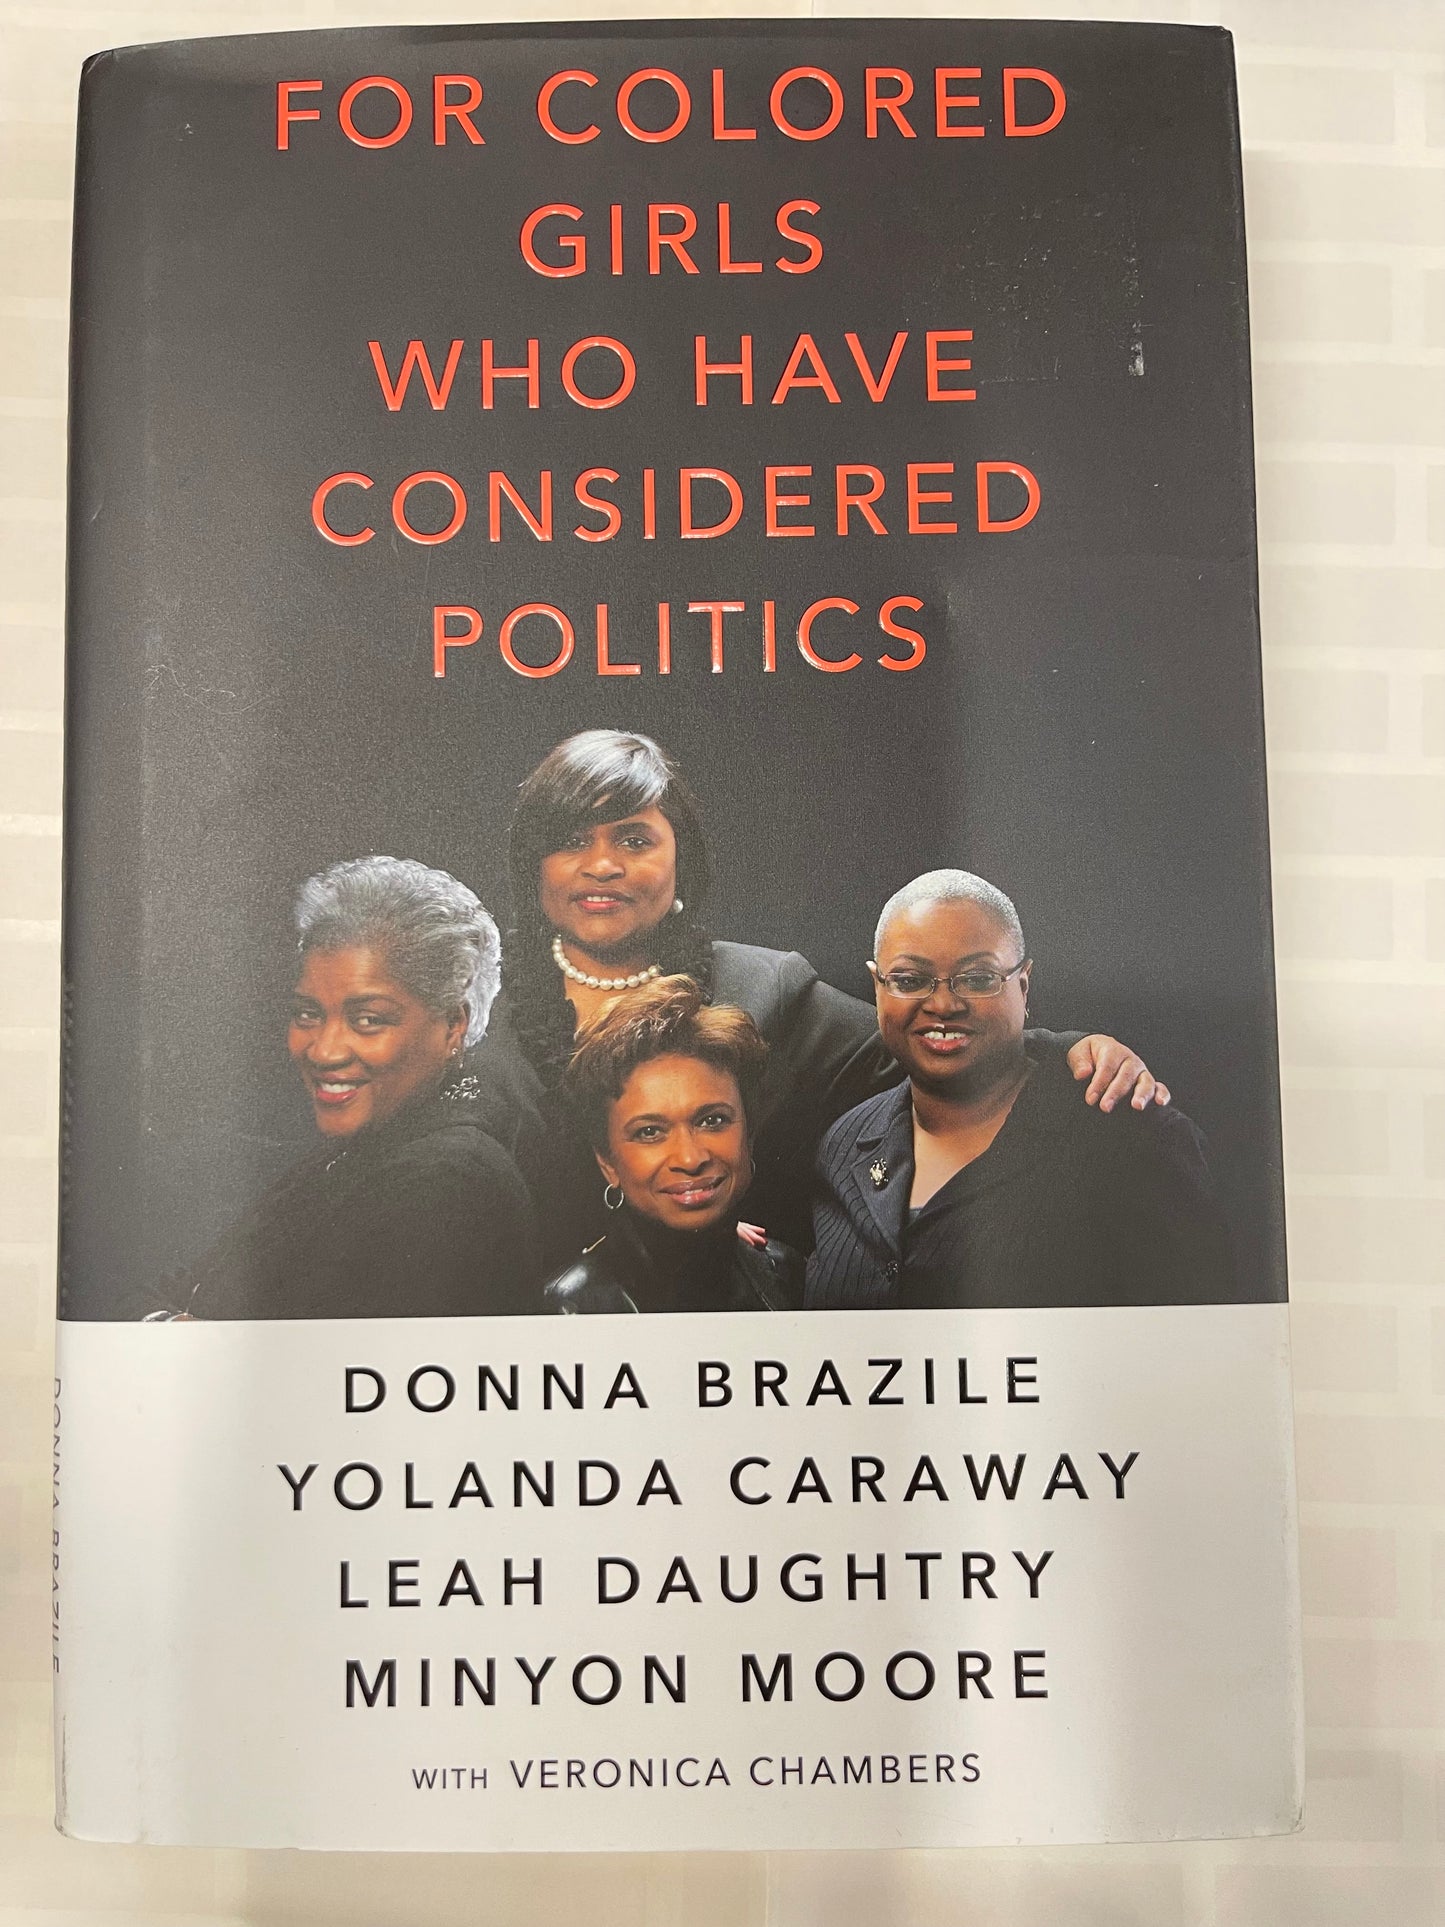 For Colored Girls Who Have Considered Politics by Donna Brazile